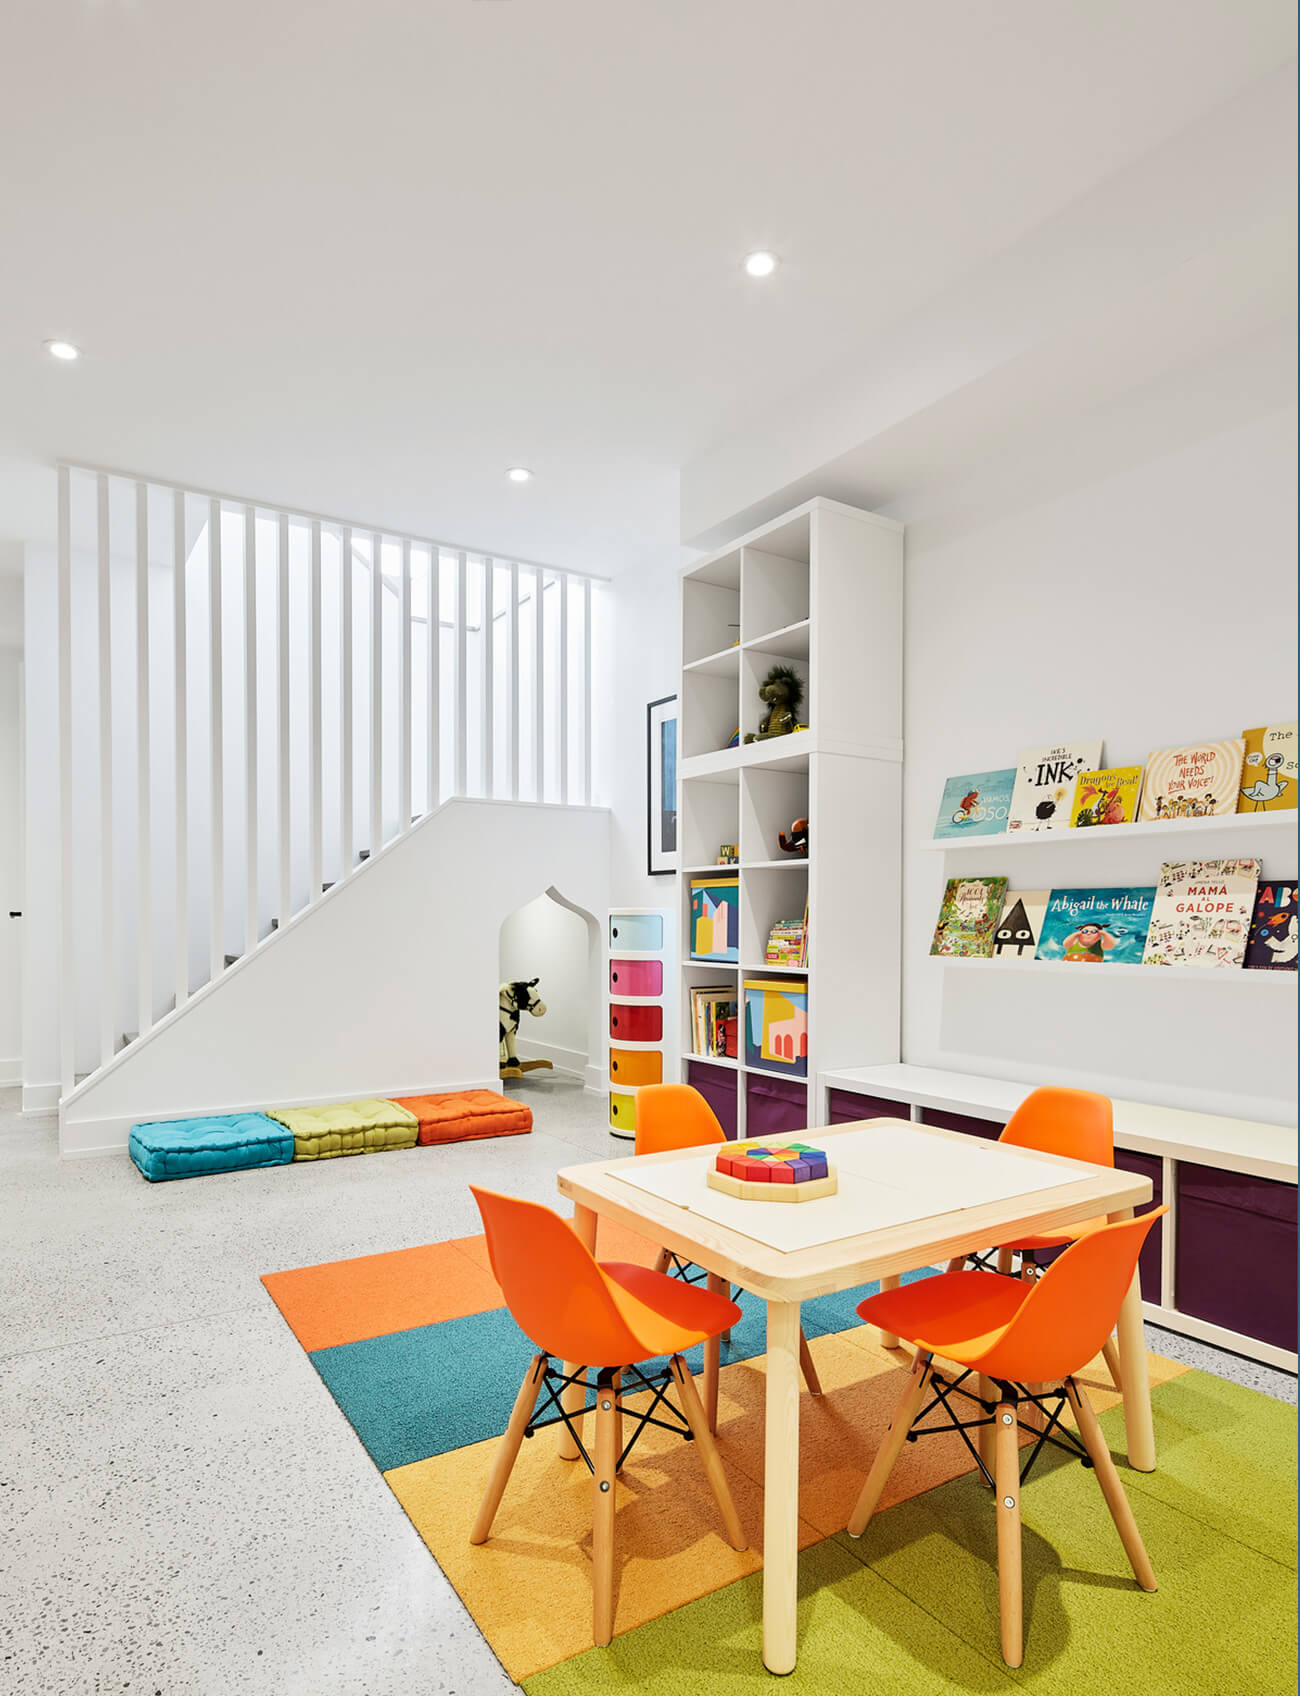 With durable Flor carpet tiles, the kids’ play area is ready to stand up to years of use. Furnishings were purchased at Kids at Home.